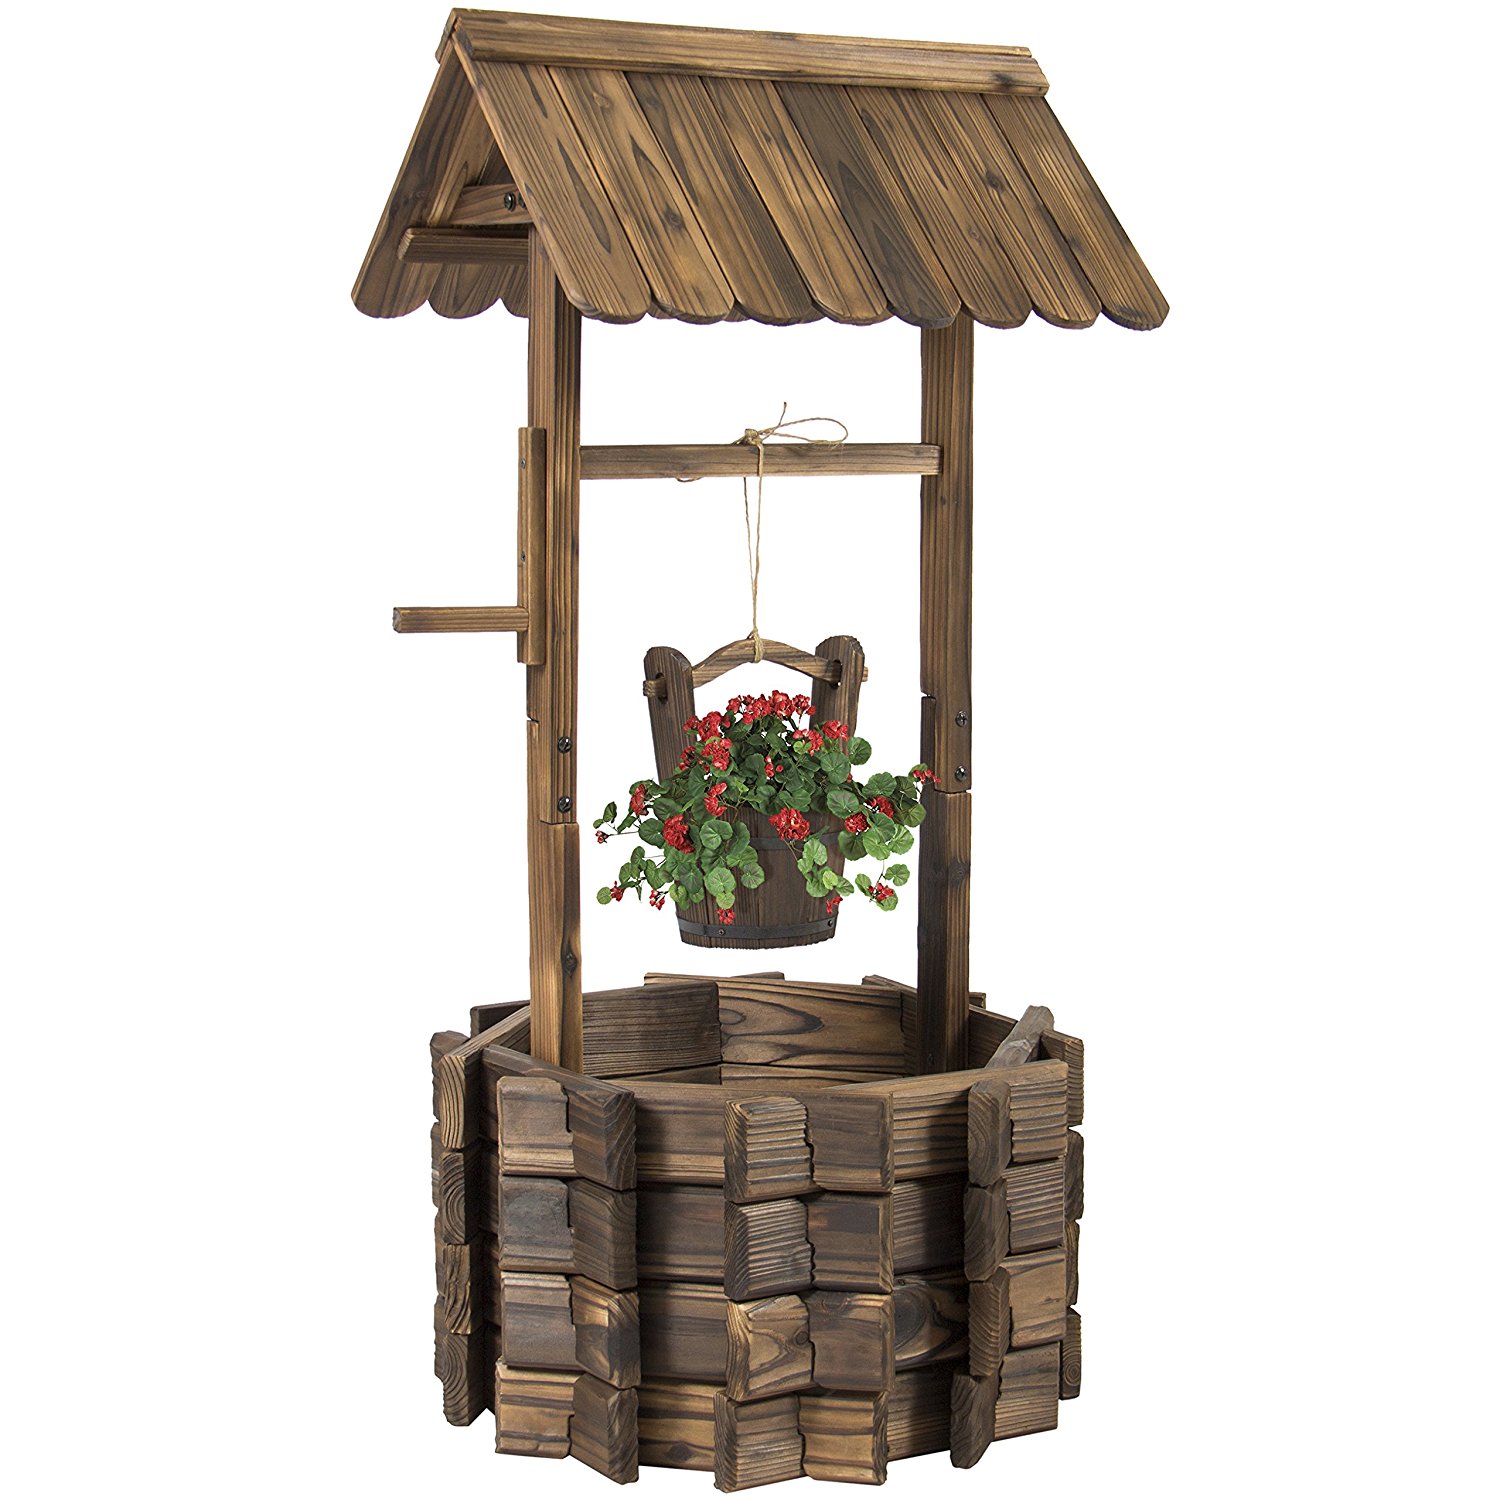 Amazon.com : Best Choice Products Wooden Wishing Well Bucket Flower ...